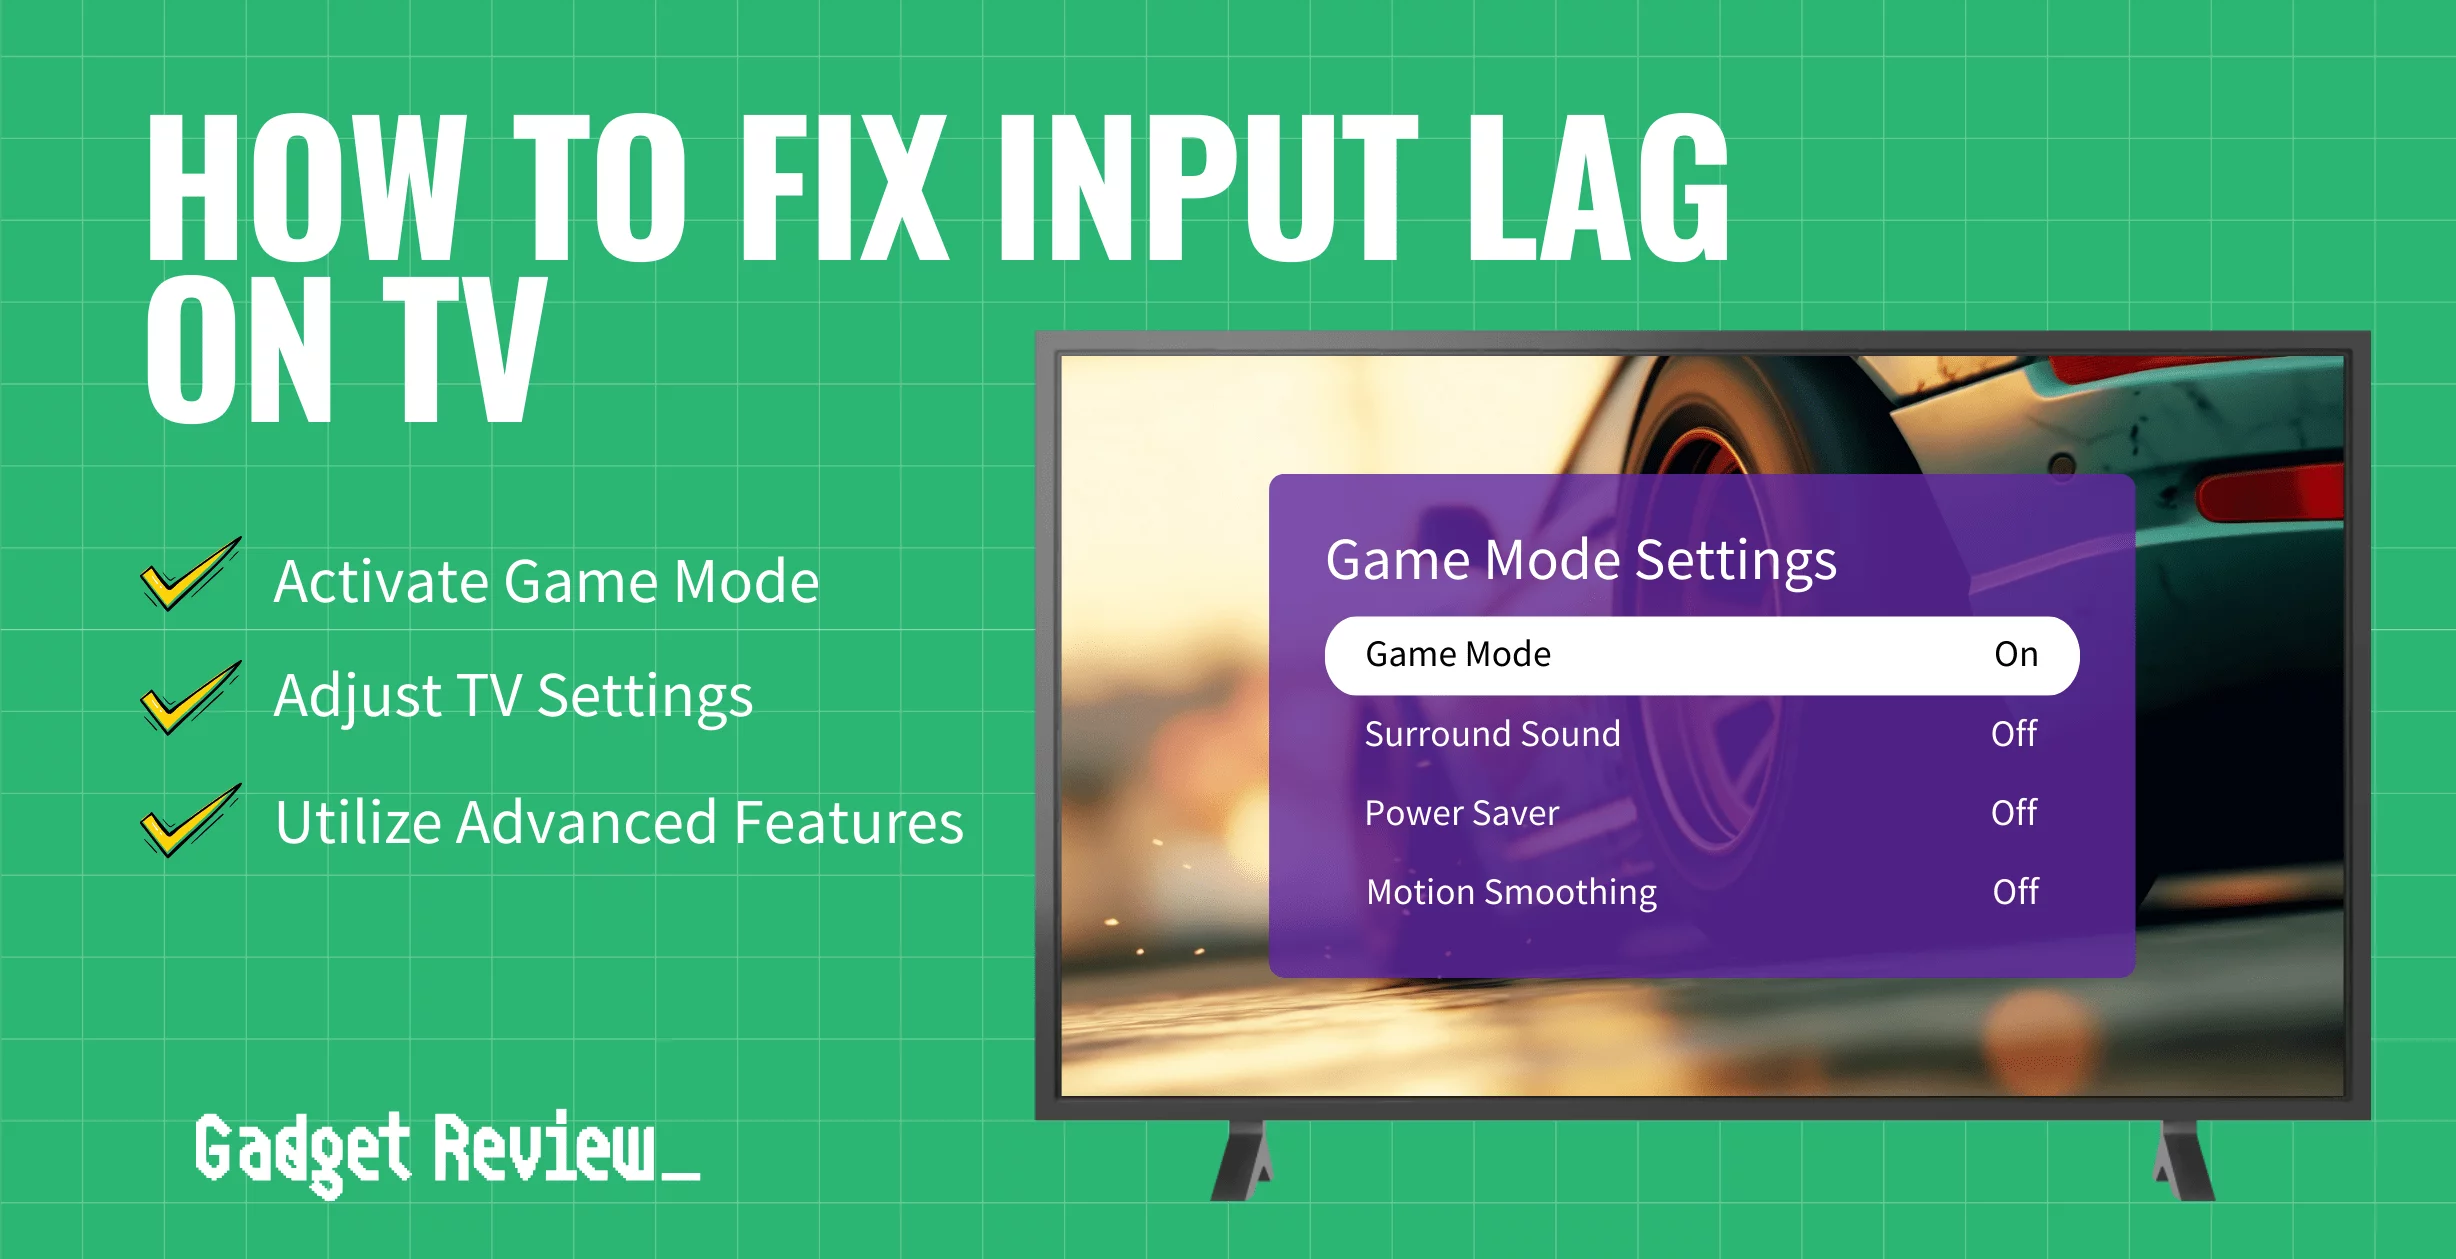 How to Fix Input Lag on a TV